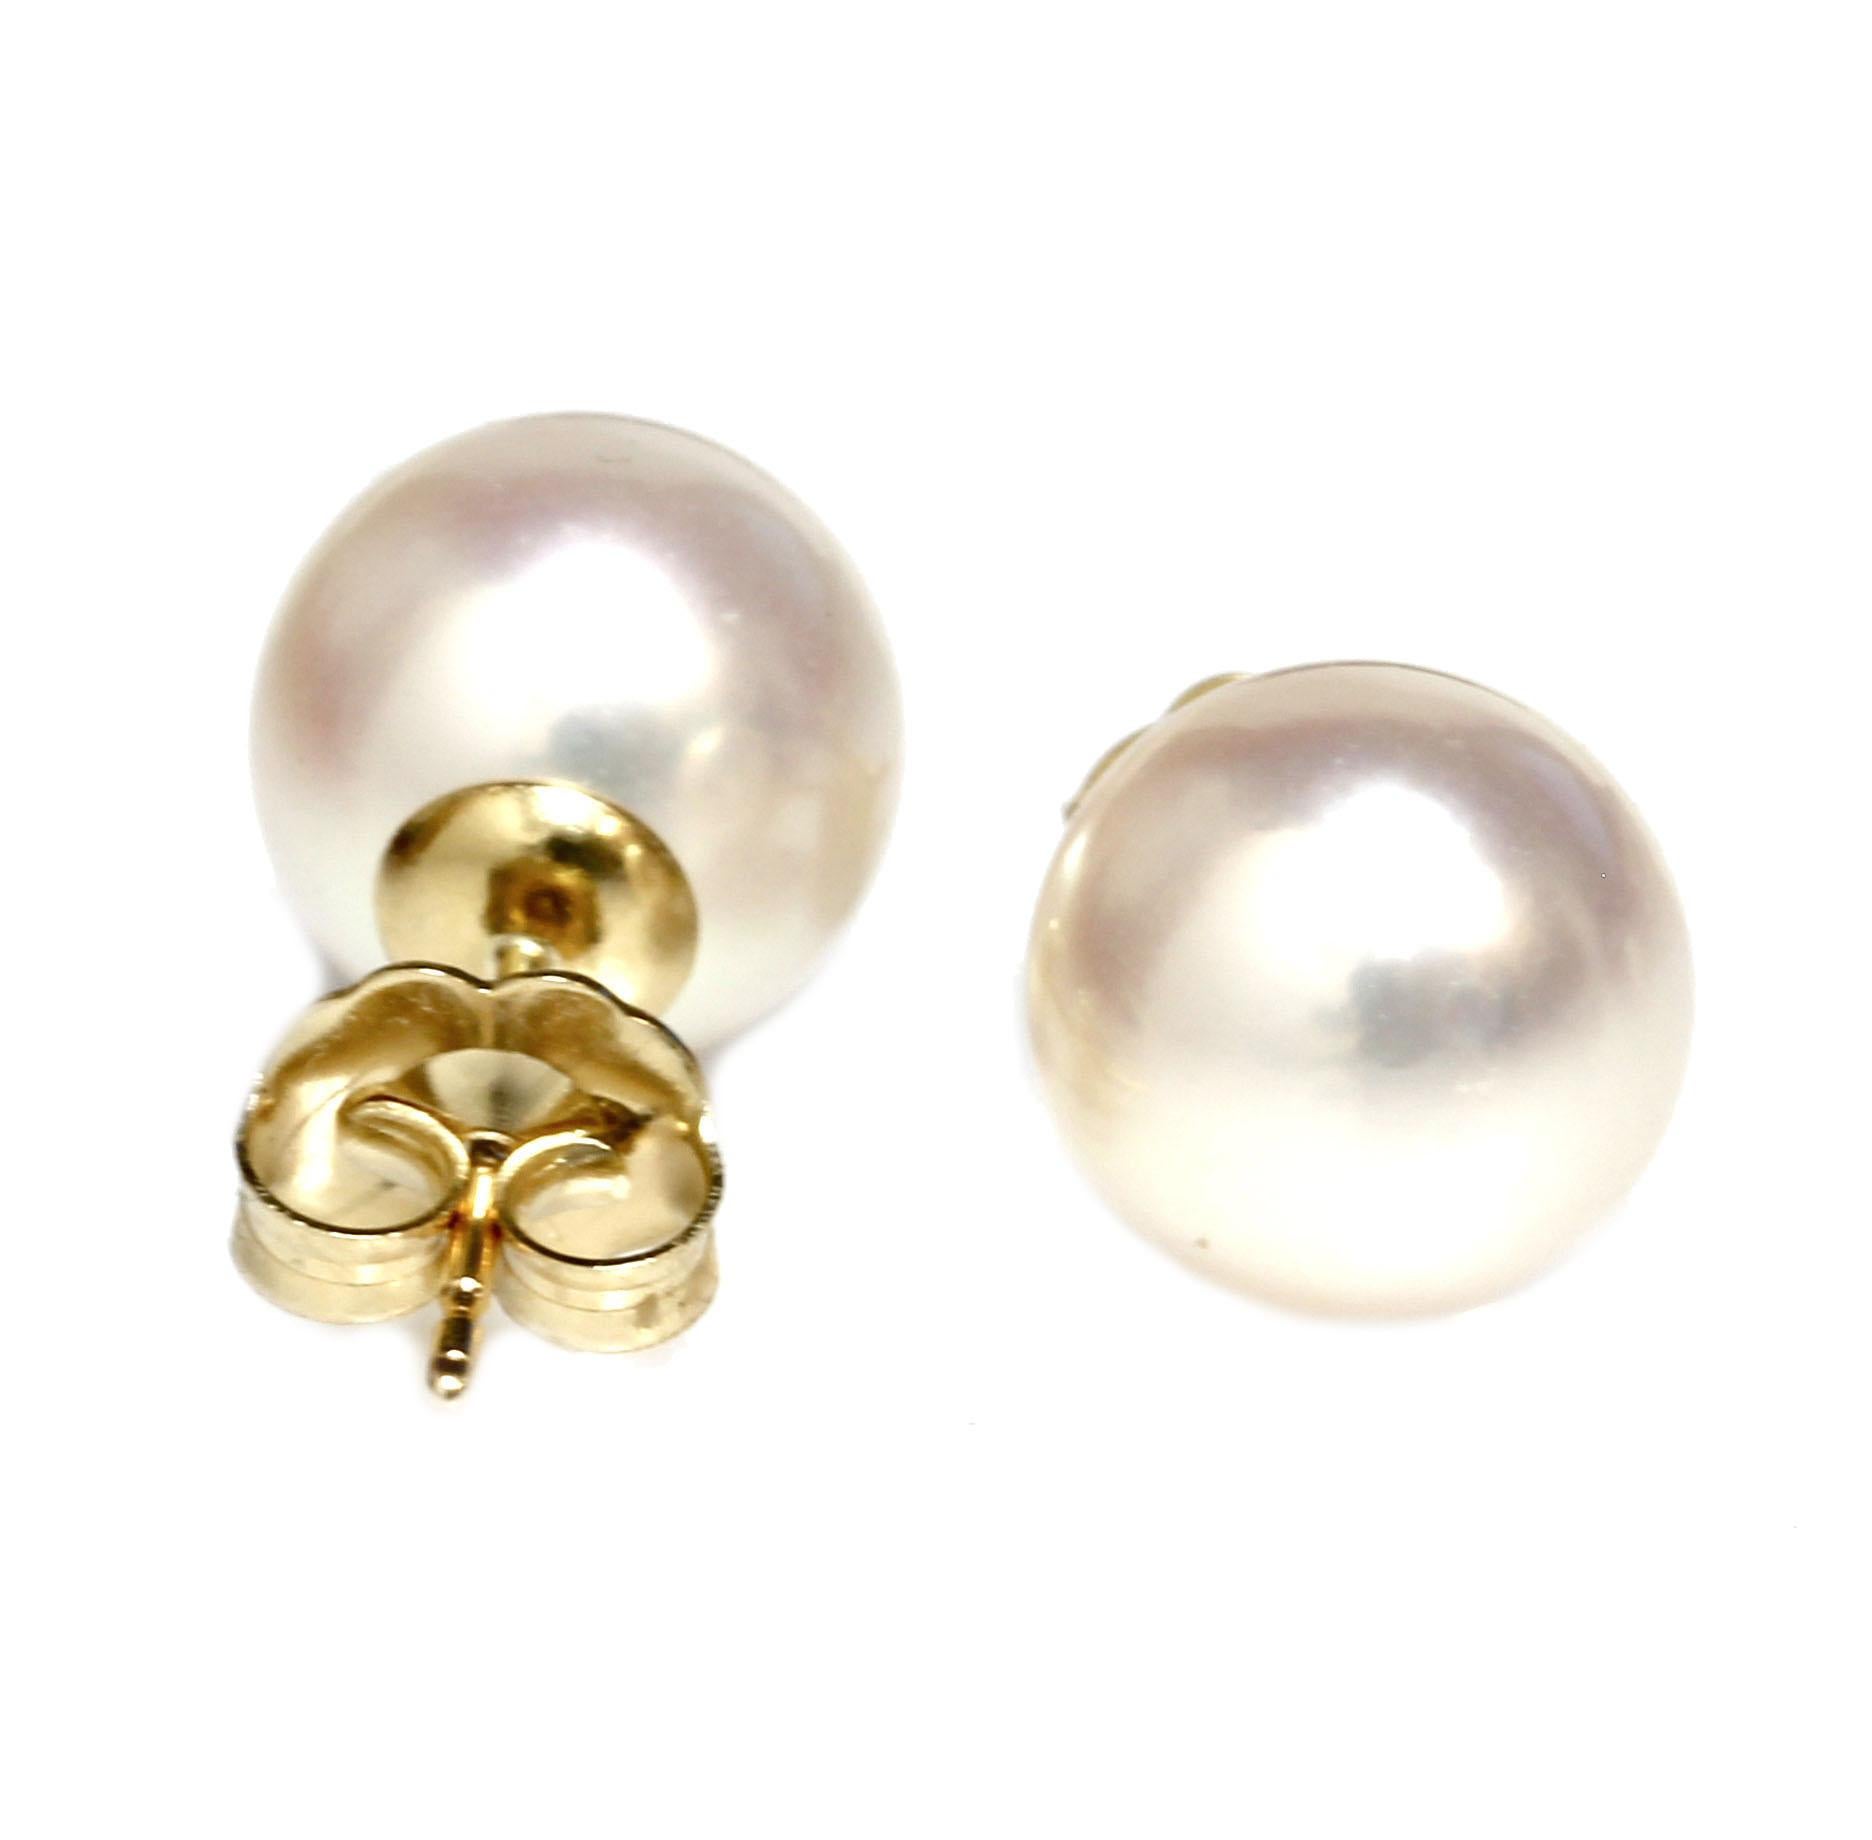 Our traditional classic saltwater akoya pearl stud earrings, the size is 9 - 9.5mm with top luster and nacre. They are flawless in surface clarity.  They are perfect round pearls with perfect classic white in color . They are set in 14k Yellow gold